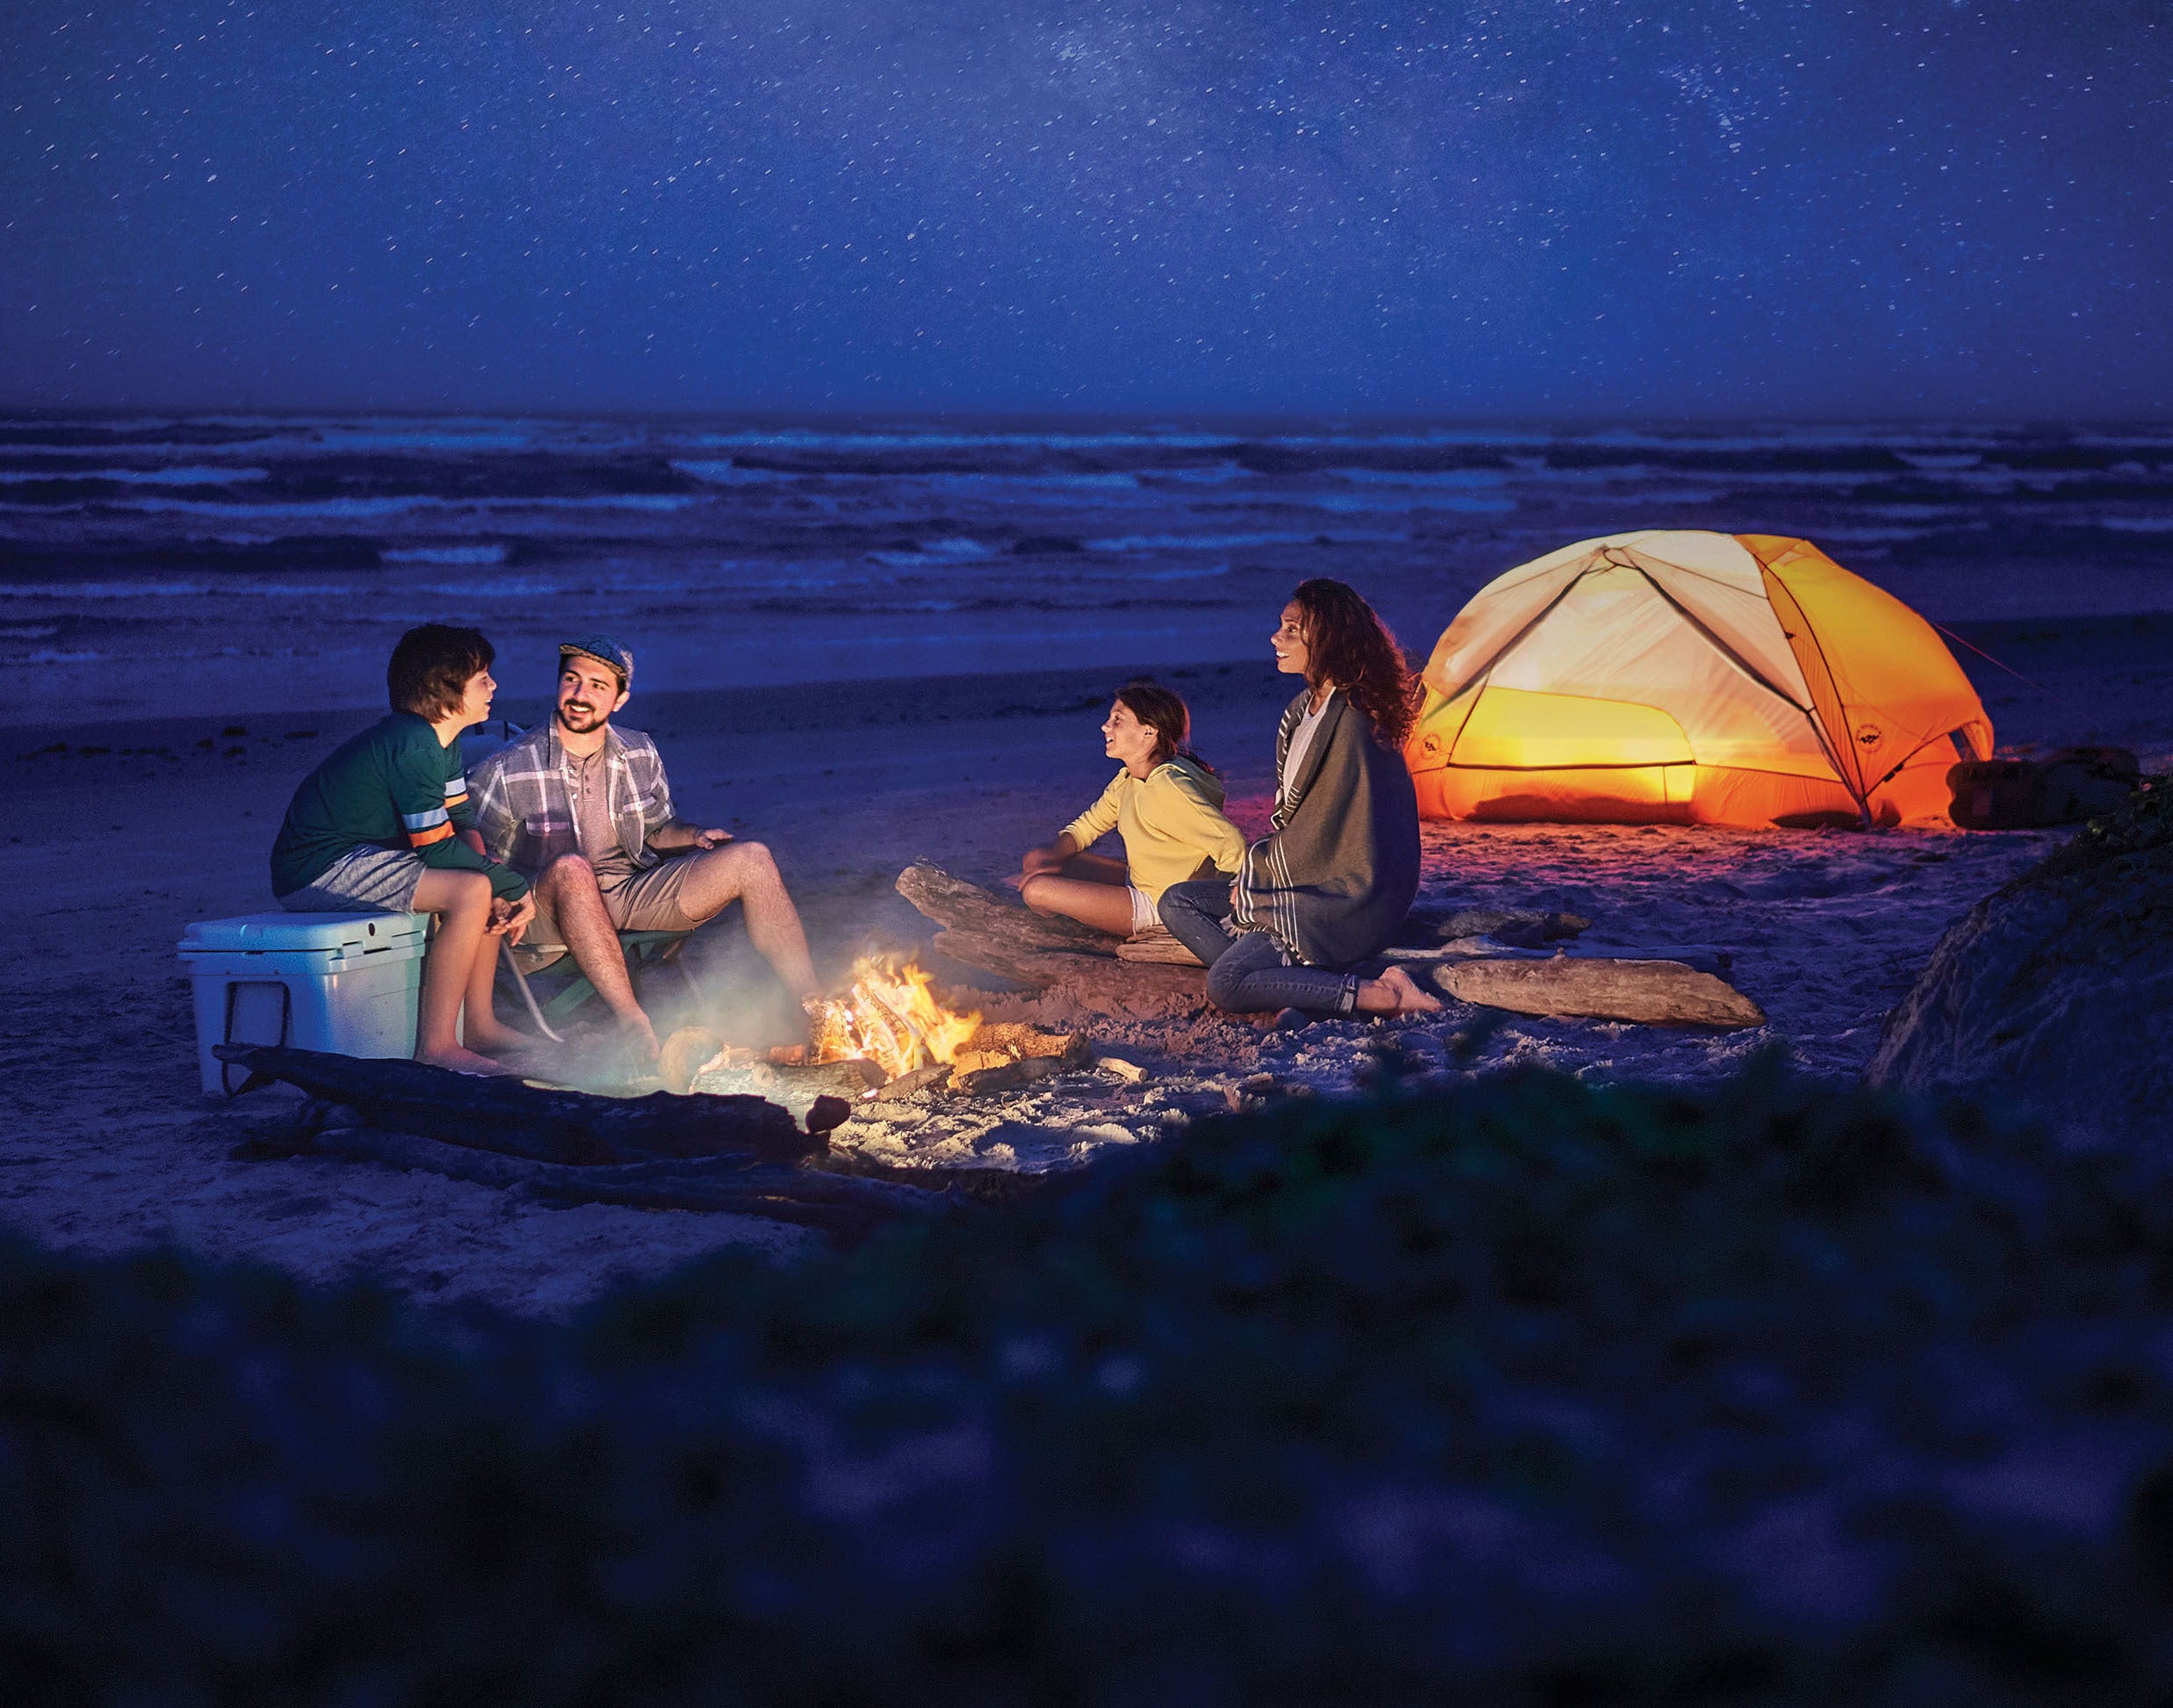 Enjoy a starry stay: camping at Mustang Island state park is just one Texas must-experience